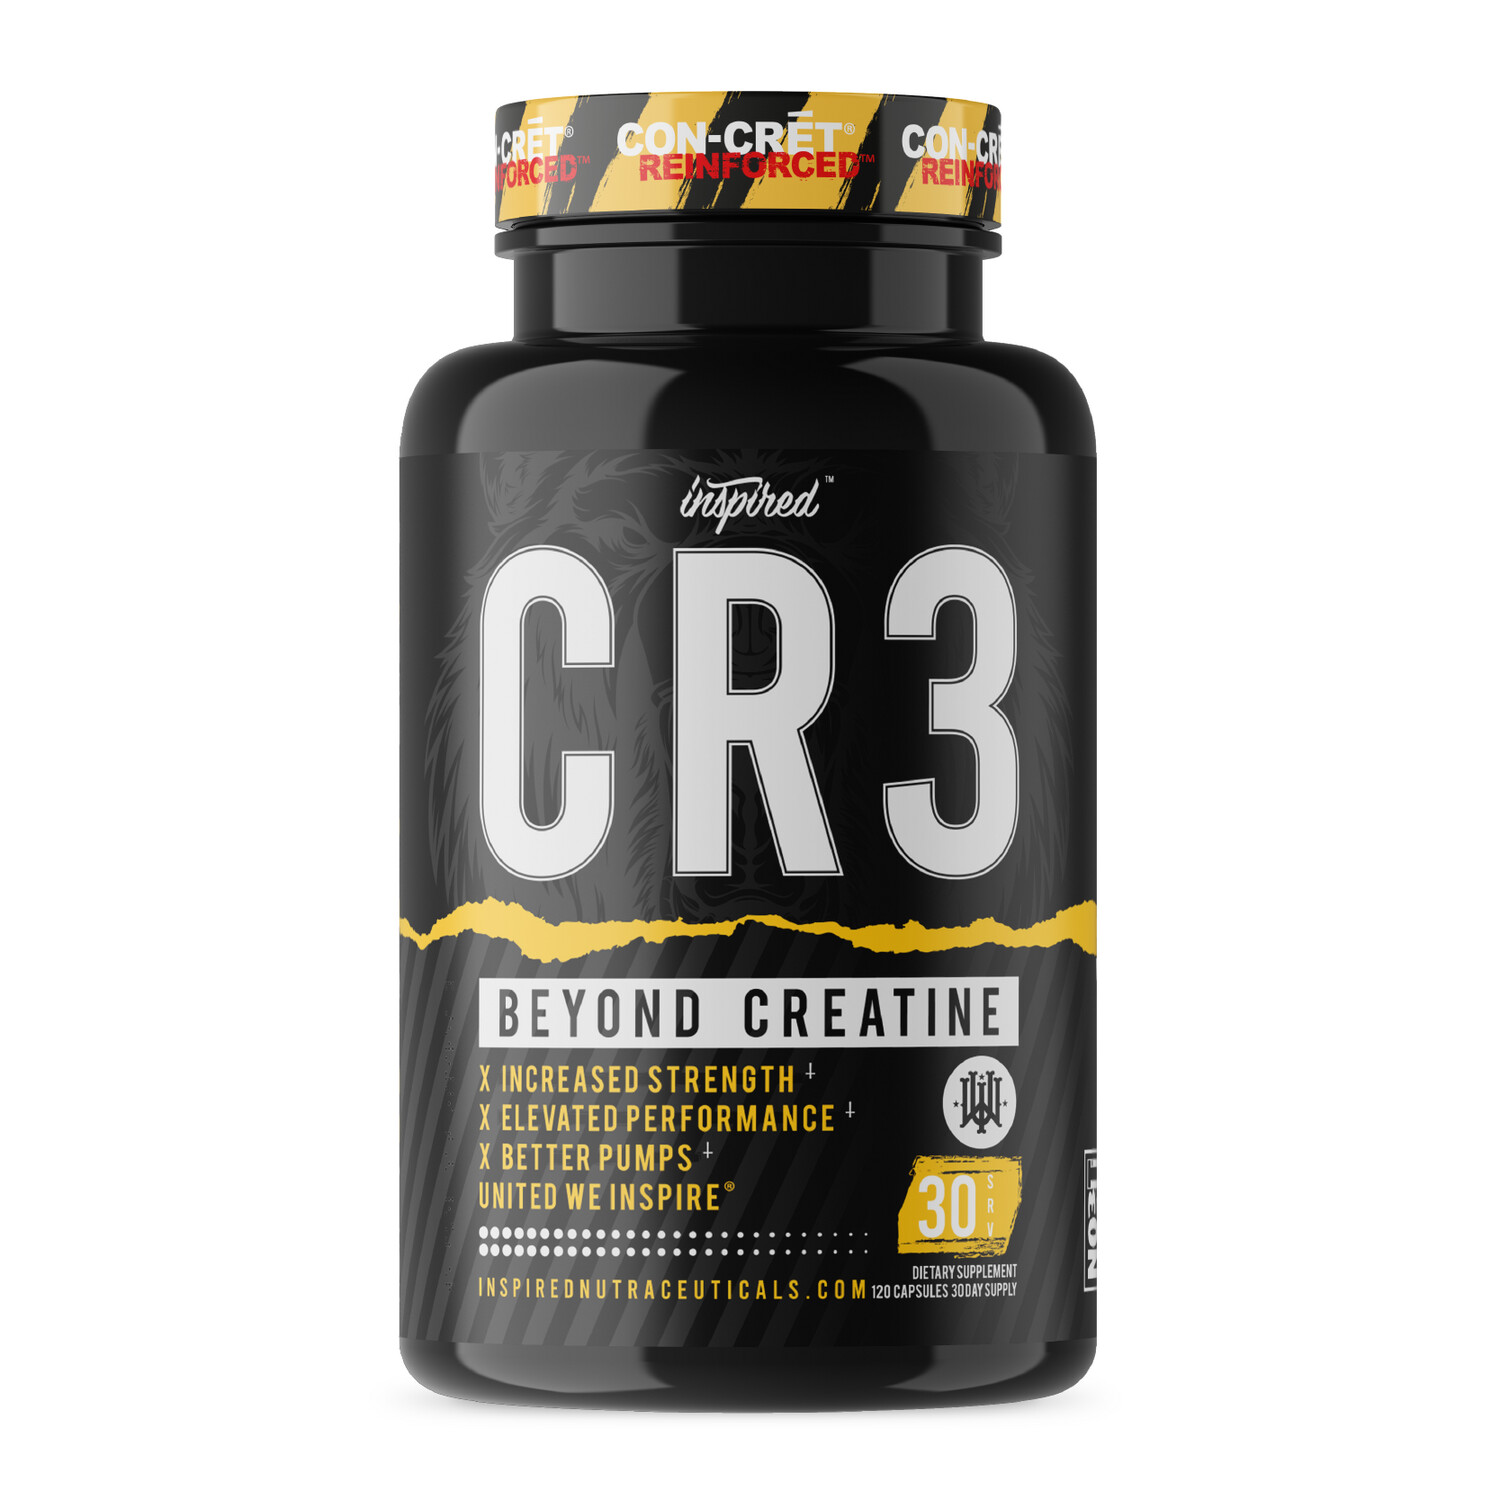 Inspired Nutraceuticals CR3 CON-CRET® Edition